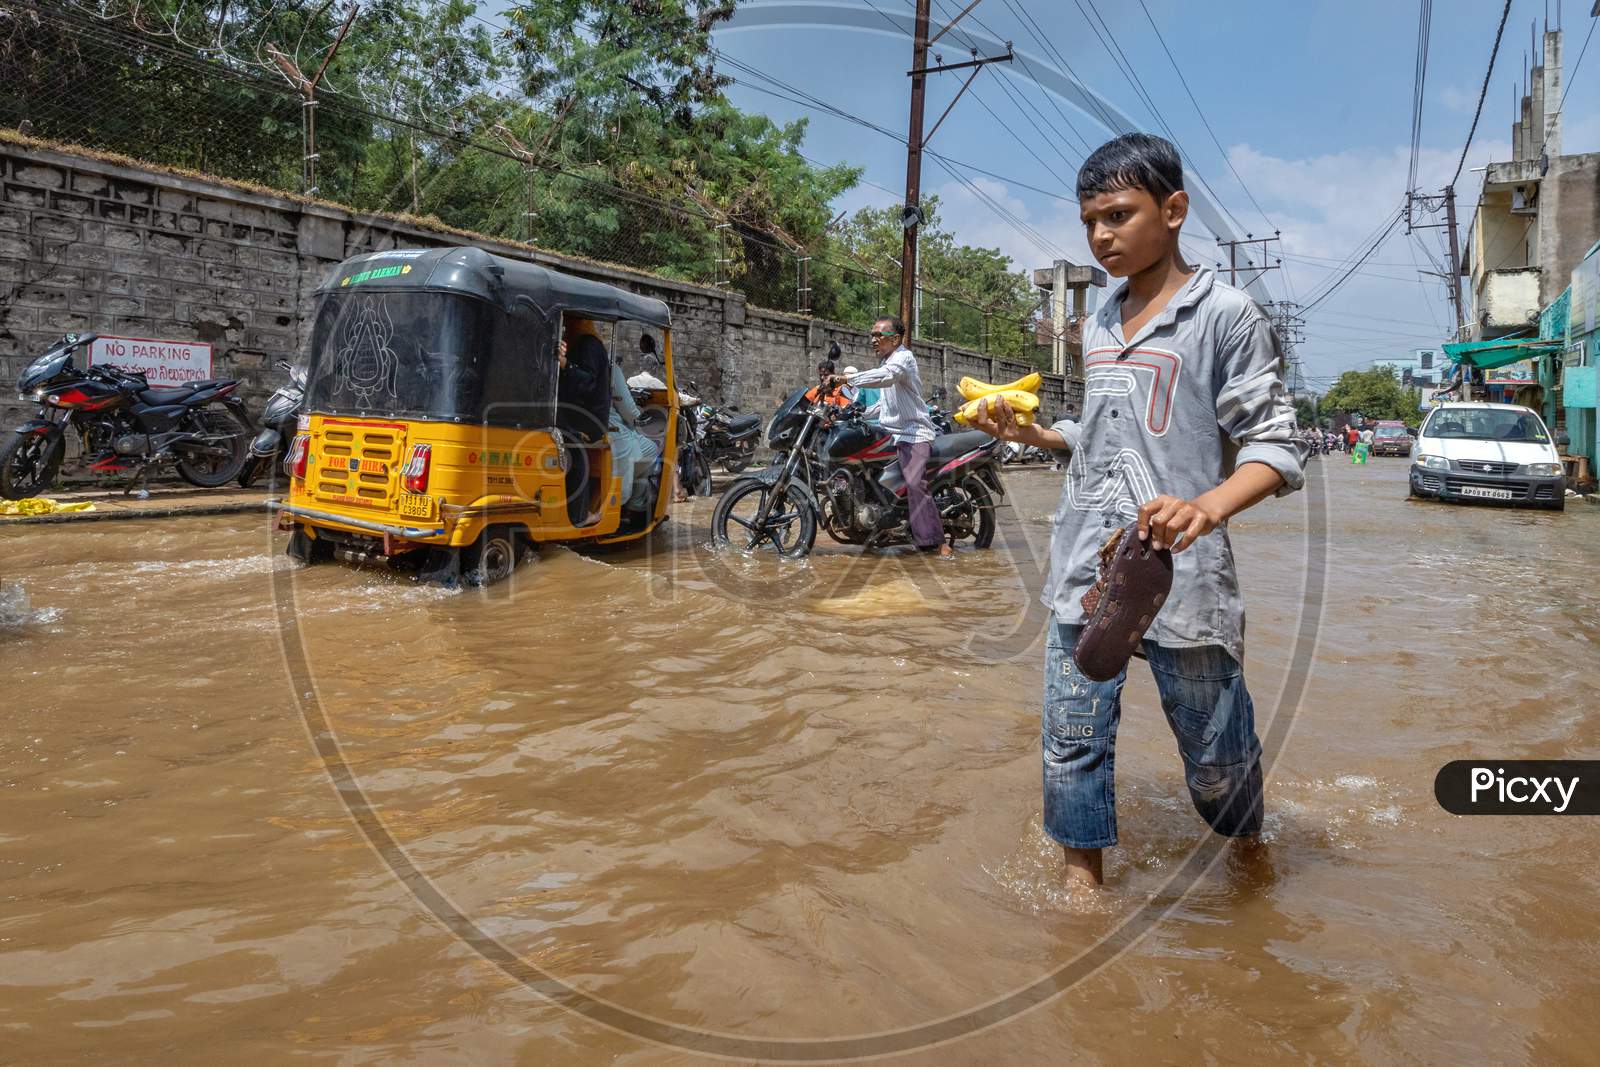 A Boy carrying bananas in the flood water occupied streets in the Hafiz Baba Nagar due to Hyderabad floods